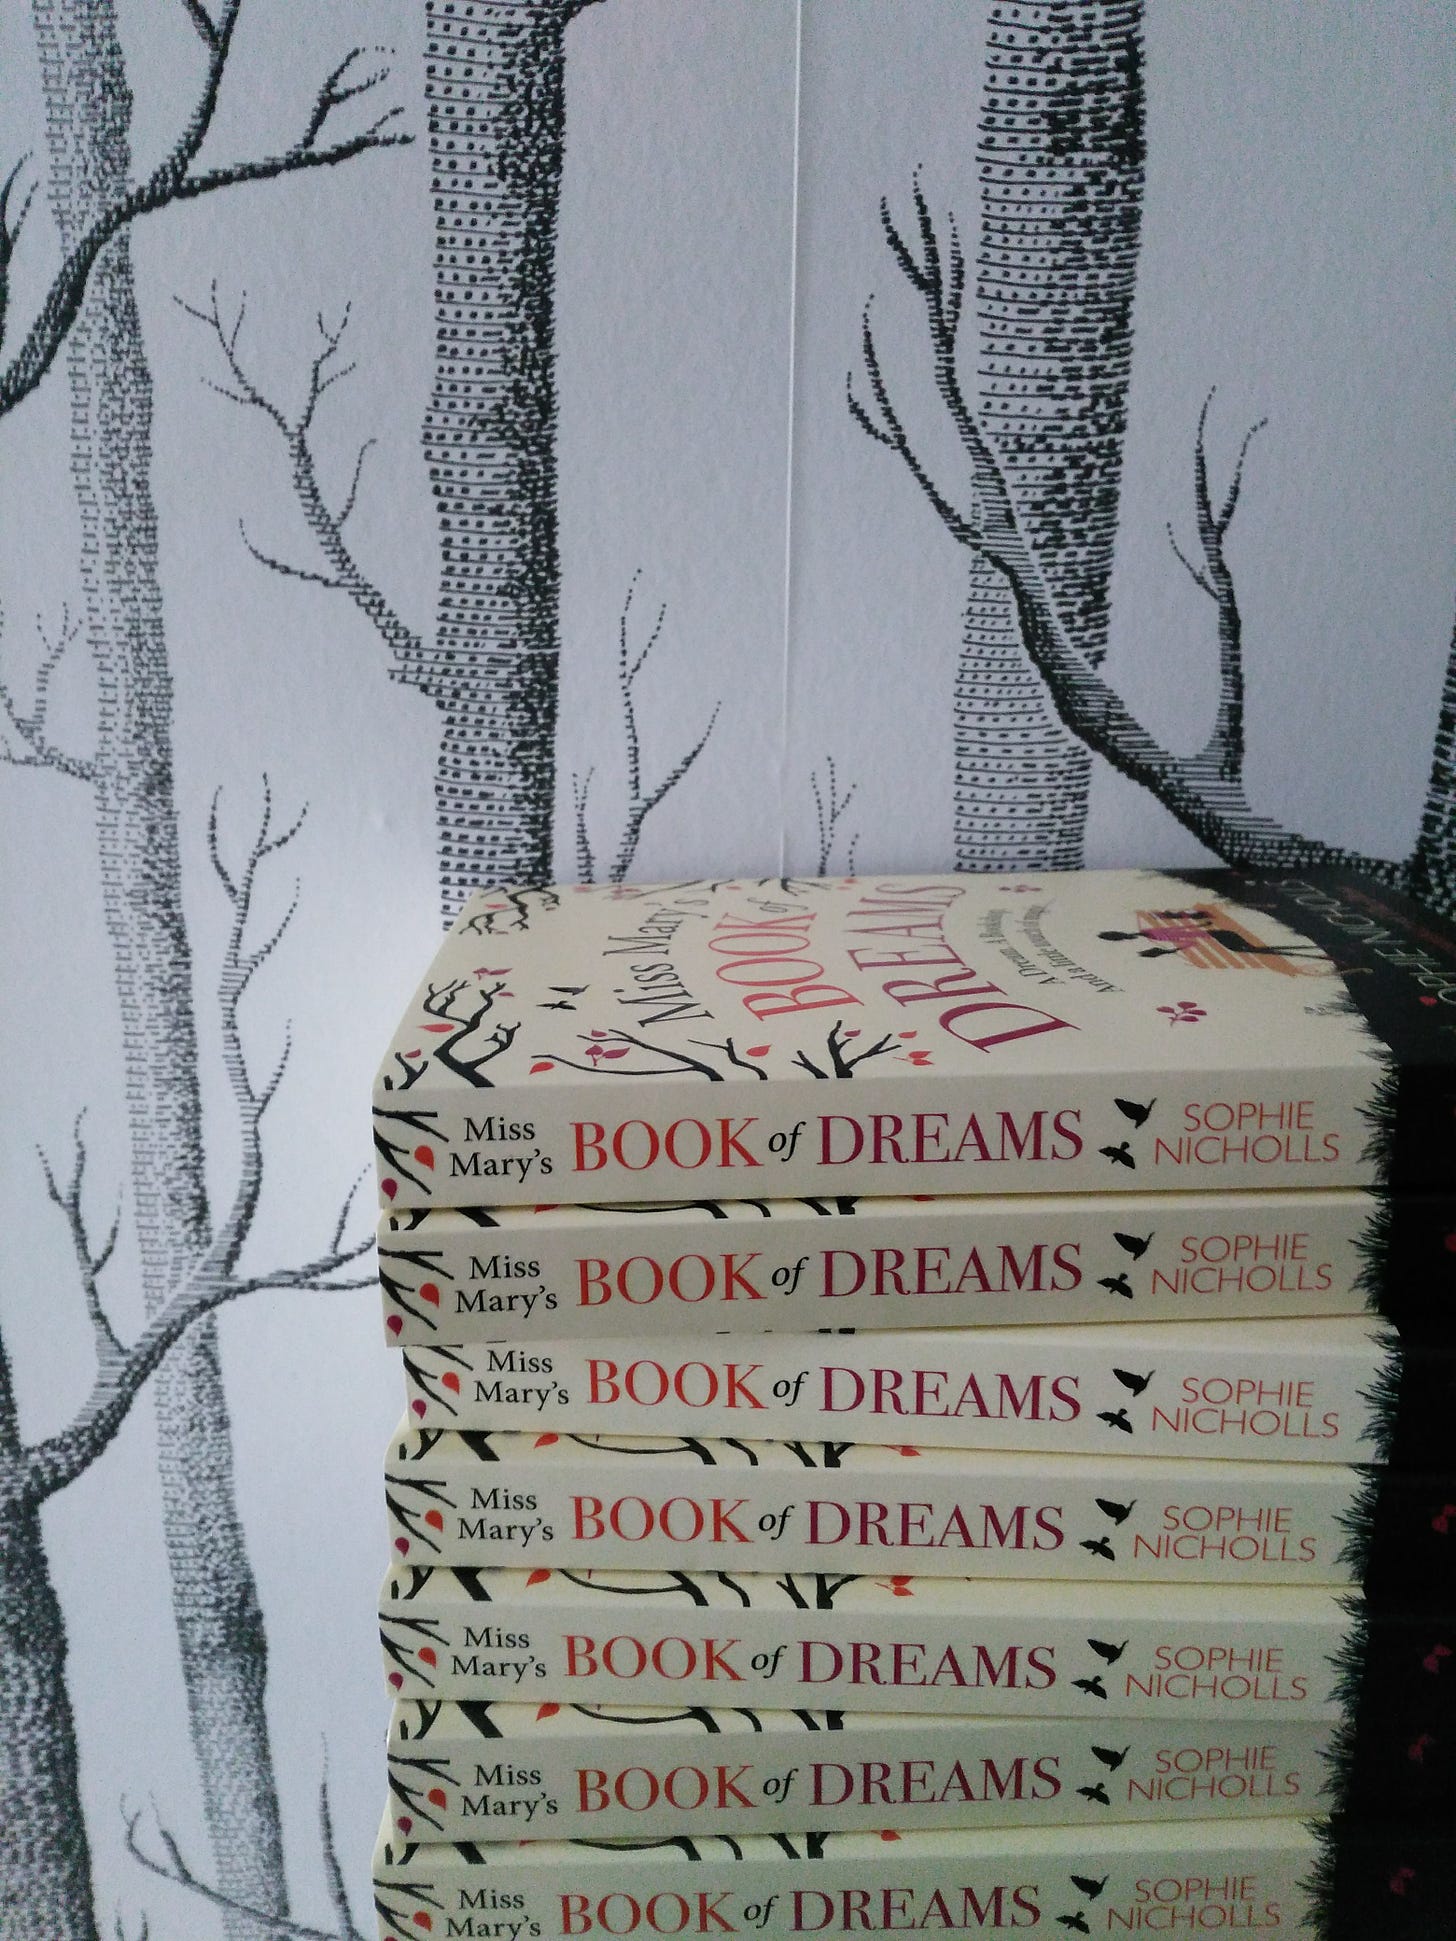 Stack of books by Sophie Nicholls. Books are the novel Miss Mary's Book of Dreams and are in front of wallpaper with black and white woodland tree pattern